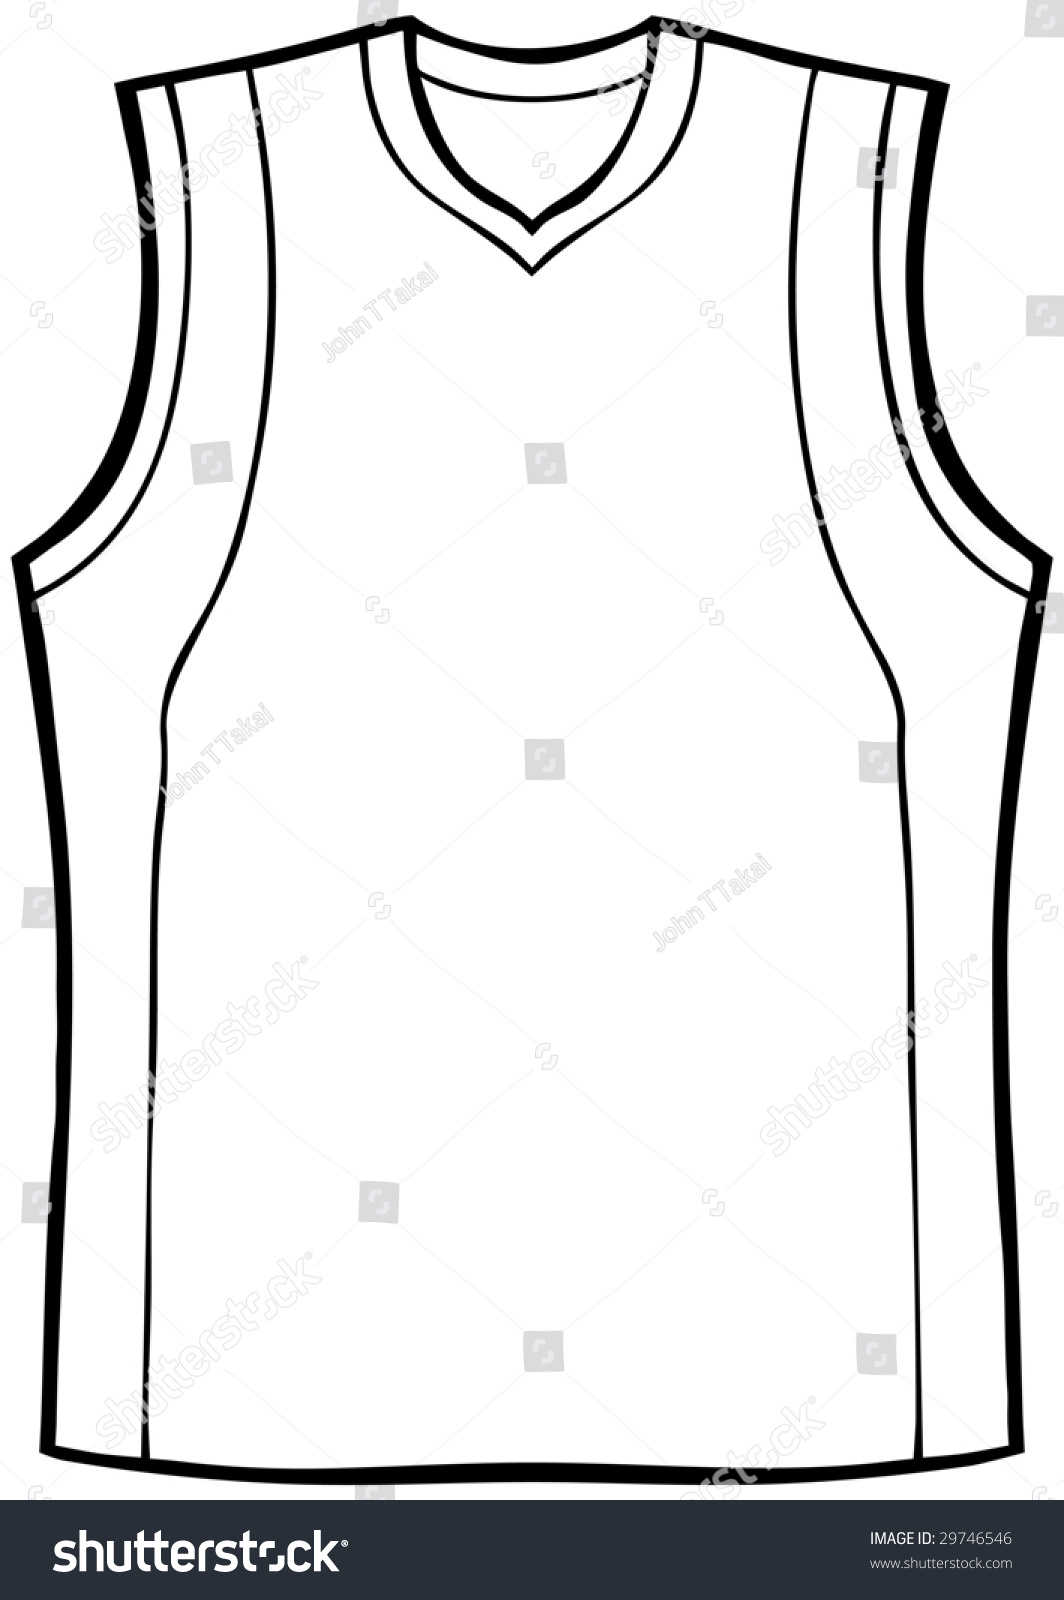 volleyball jersey clipart - photo #47